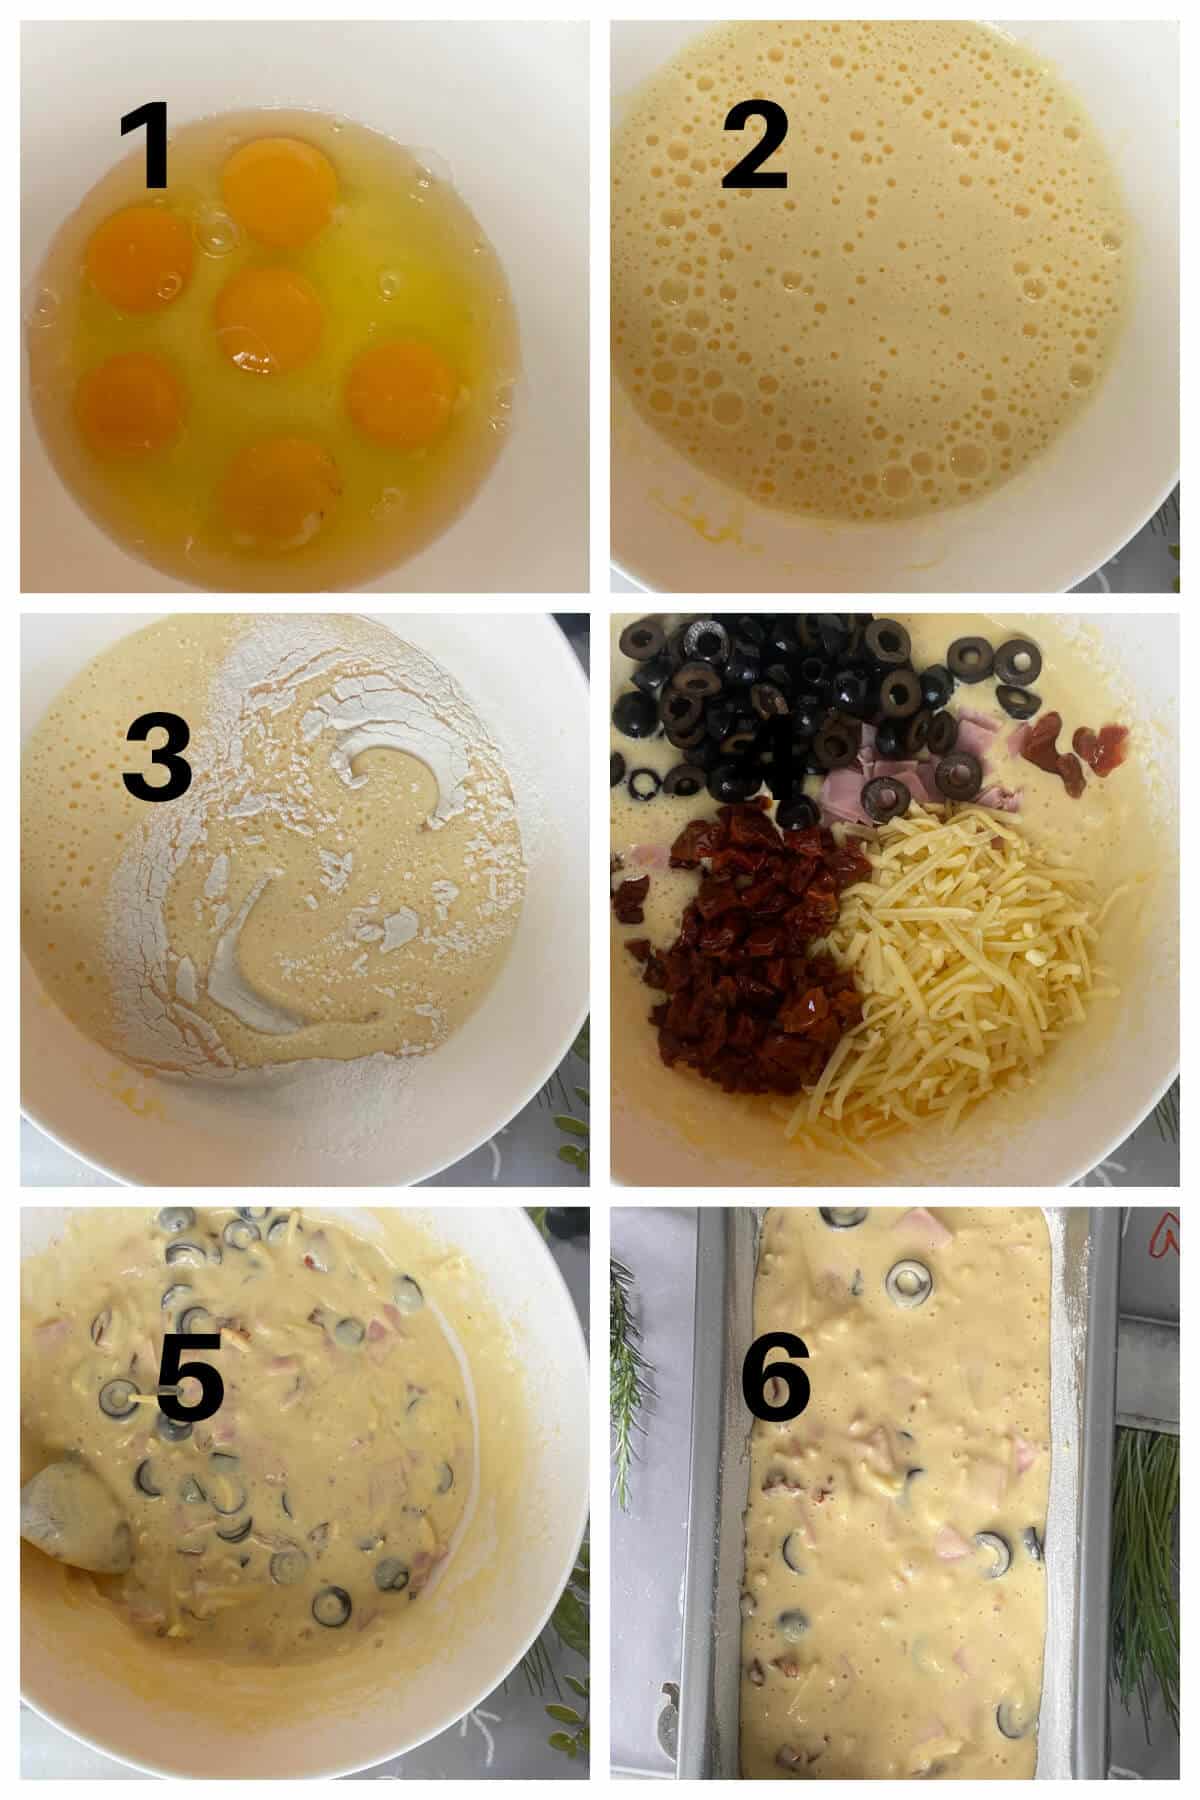 Collage of 6 photos to show how to make a savoury cake loaf.